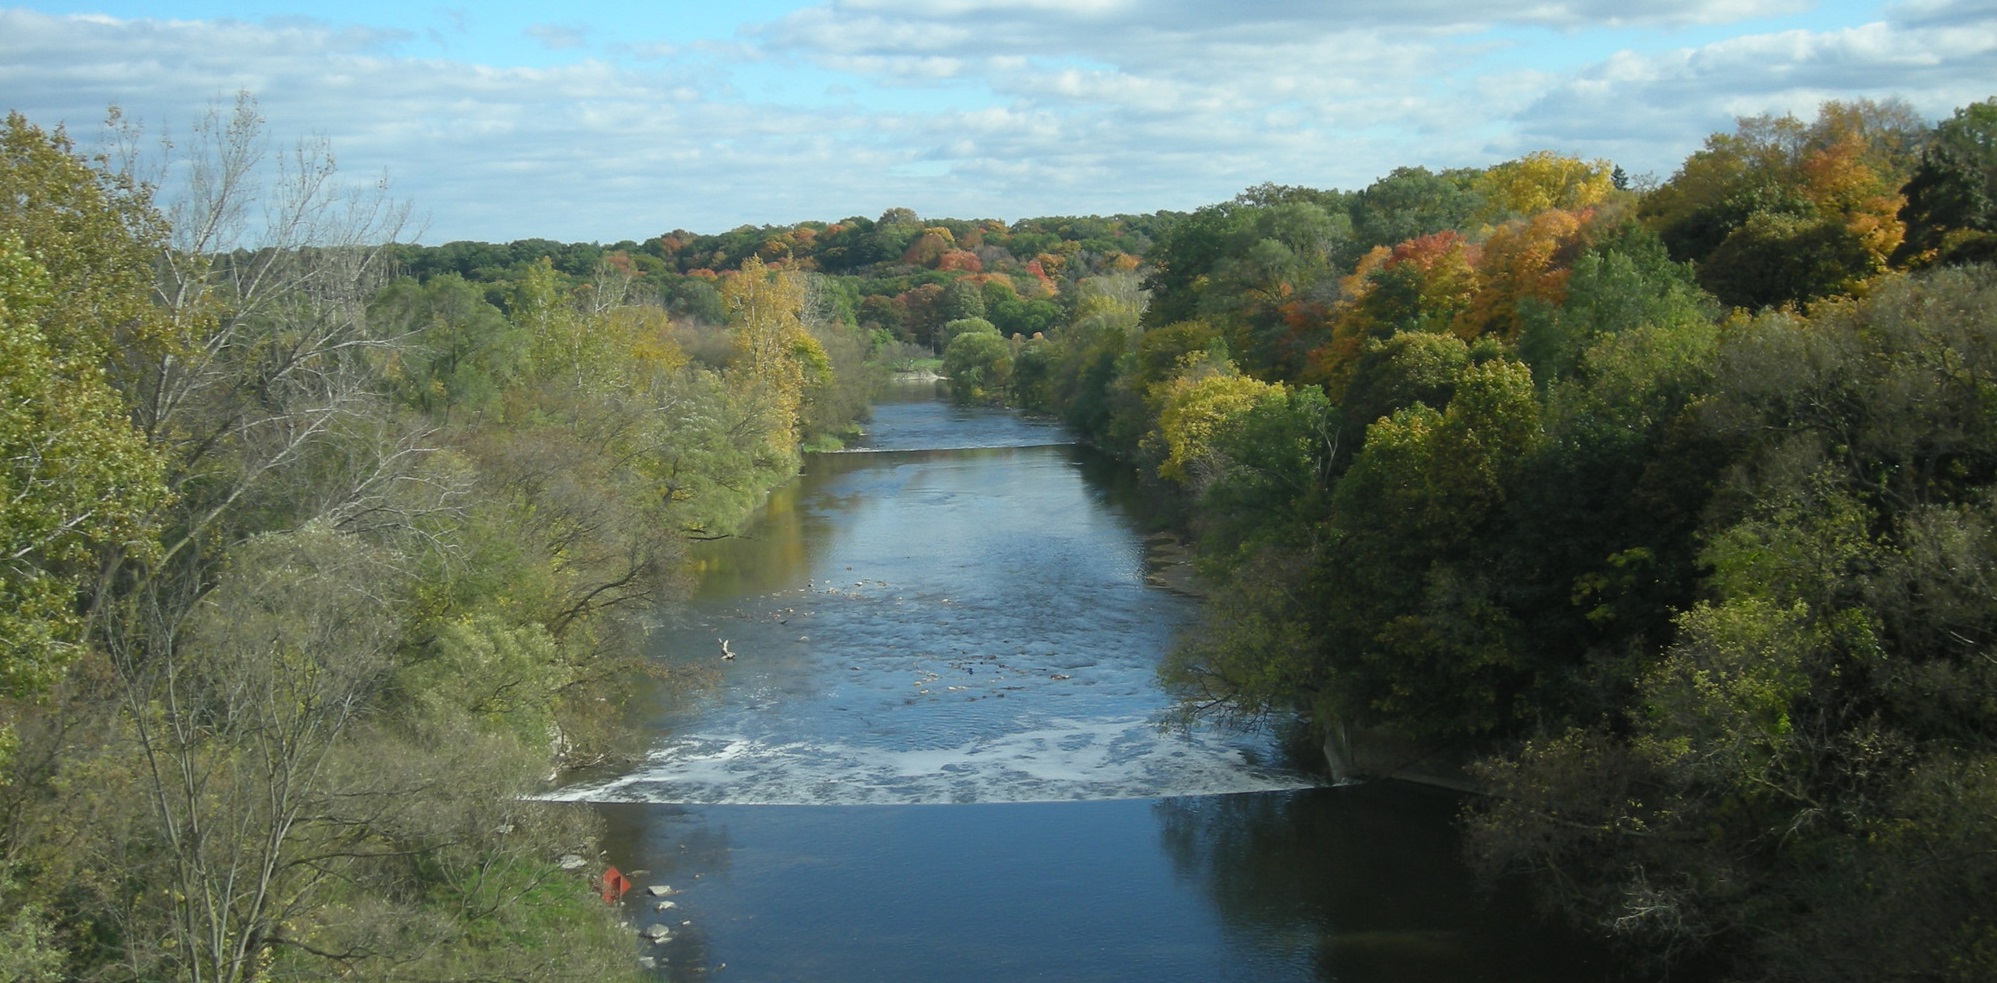 View of the Humber River